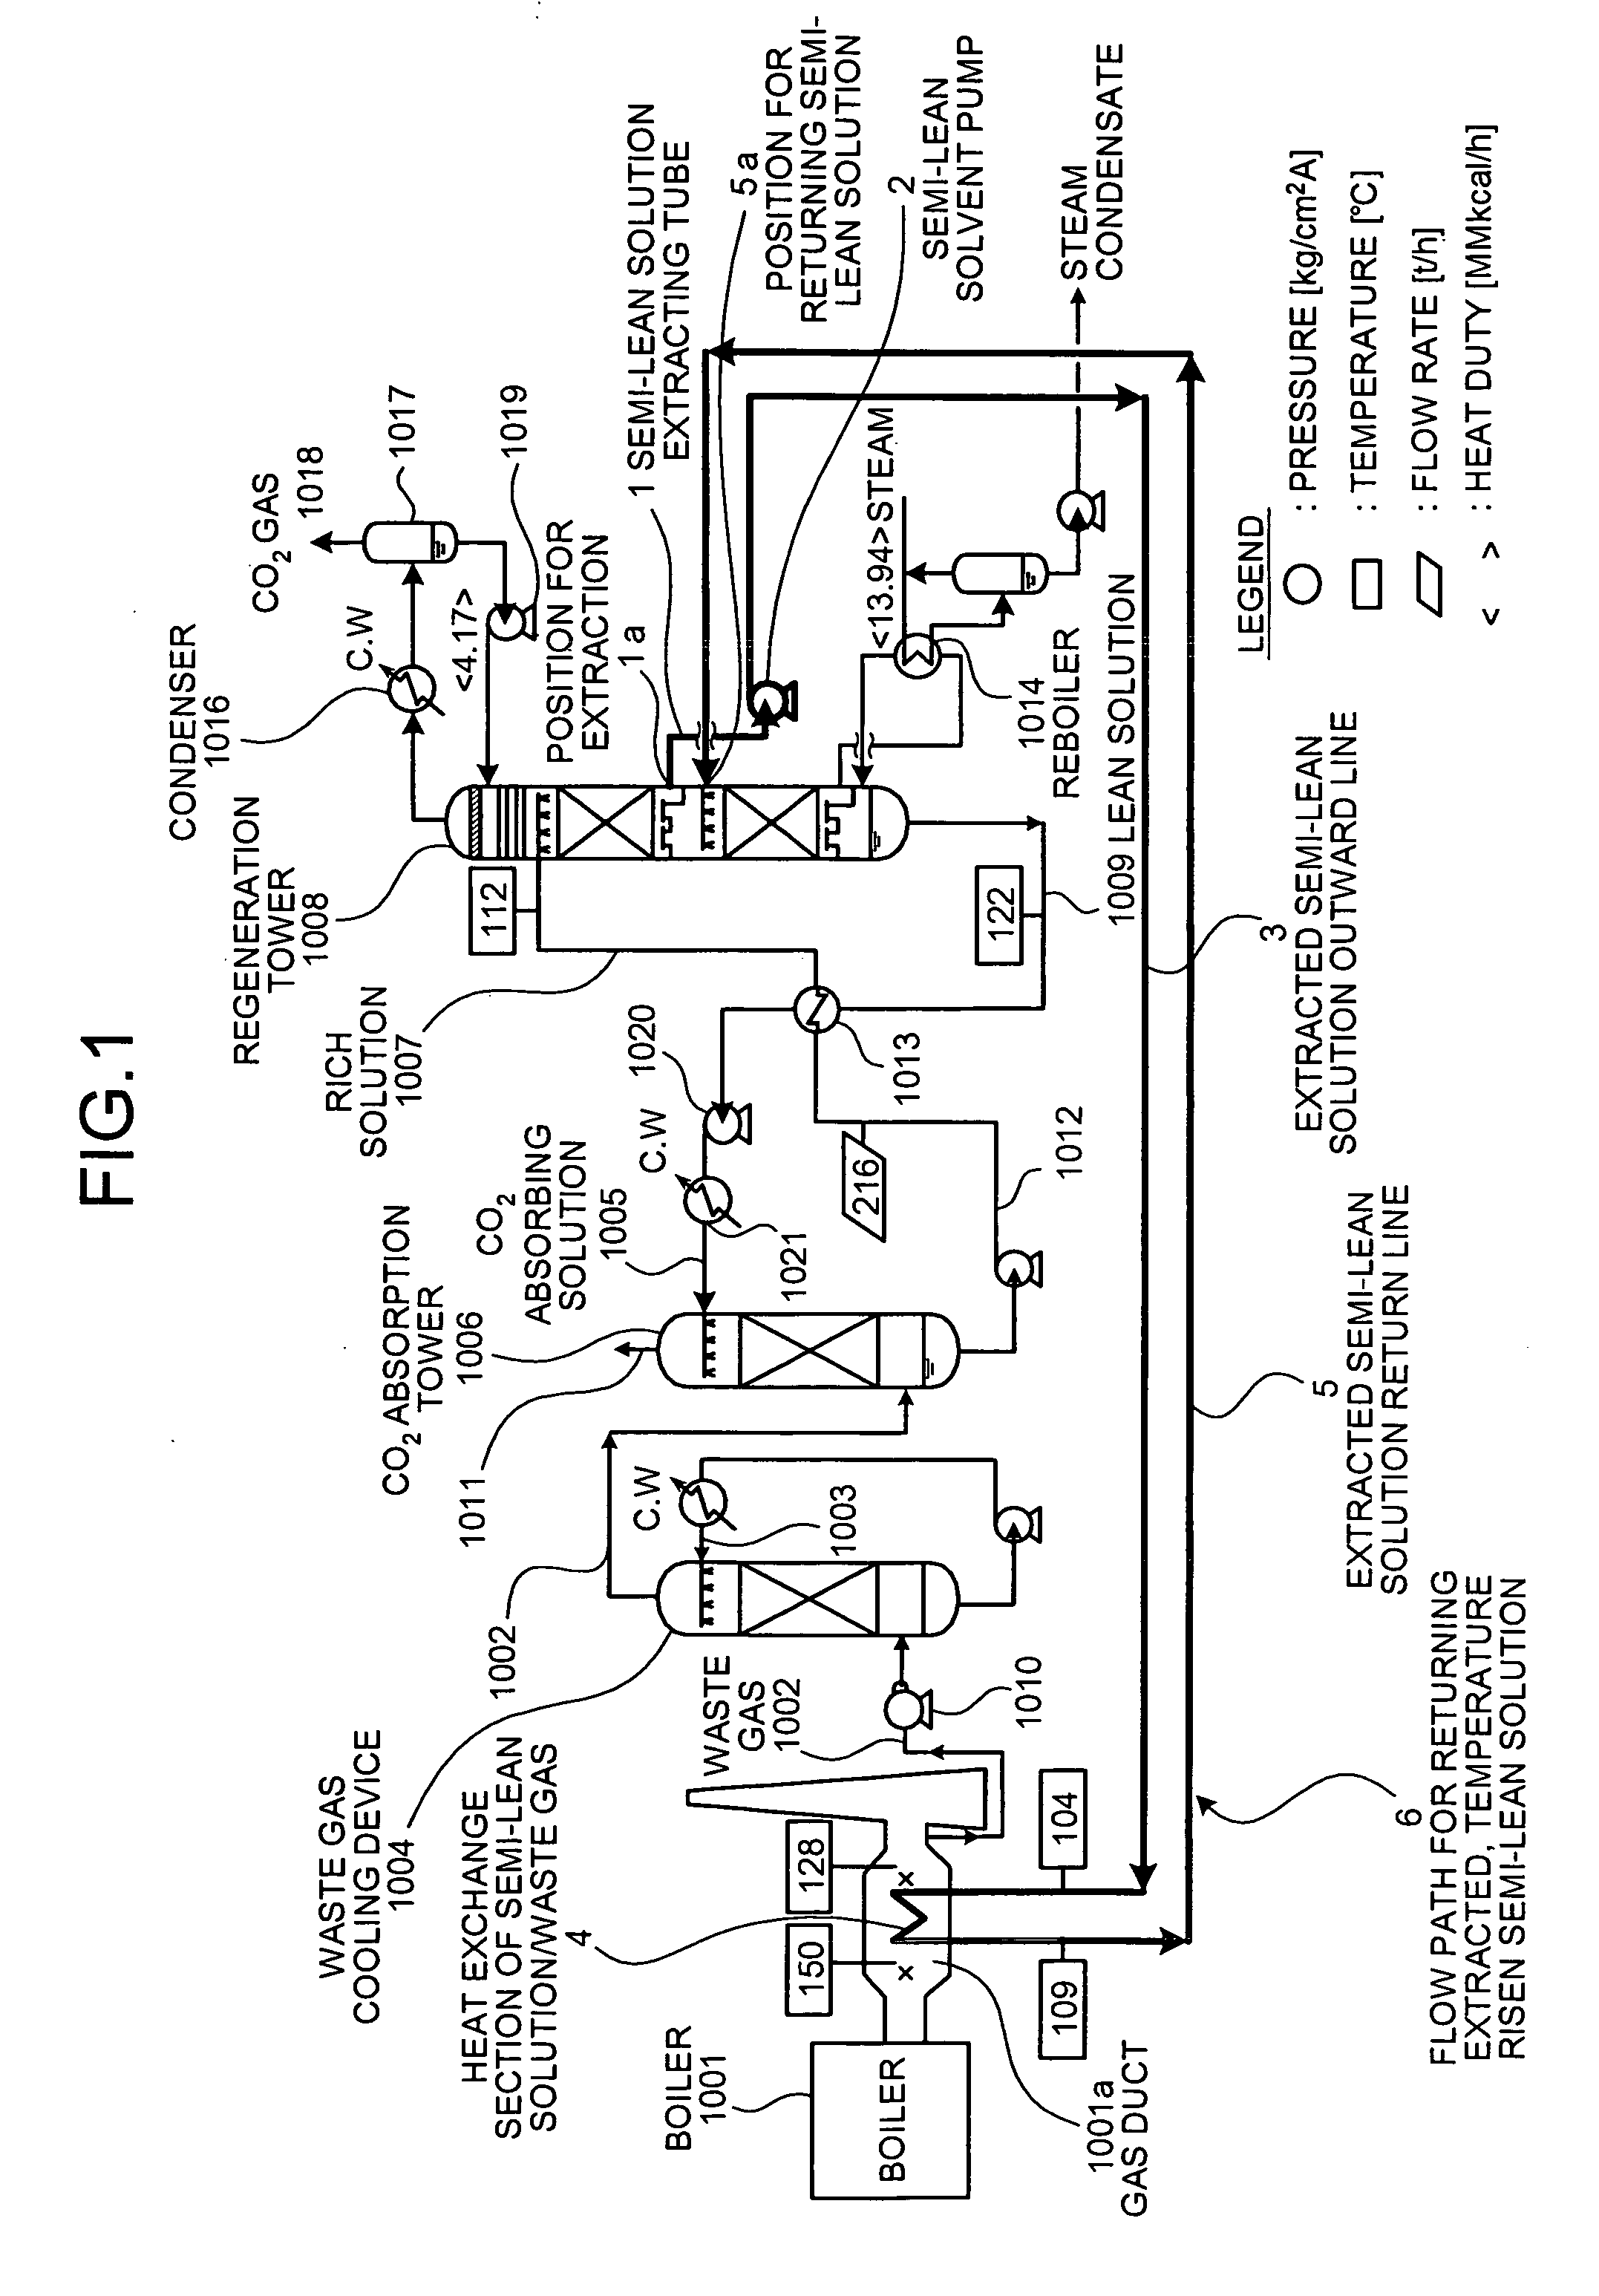 Apparatus and method for CO2 recovery